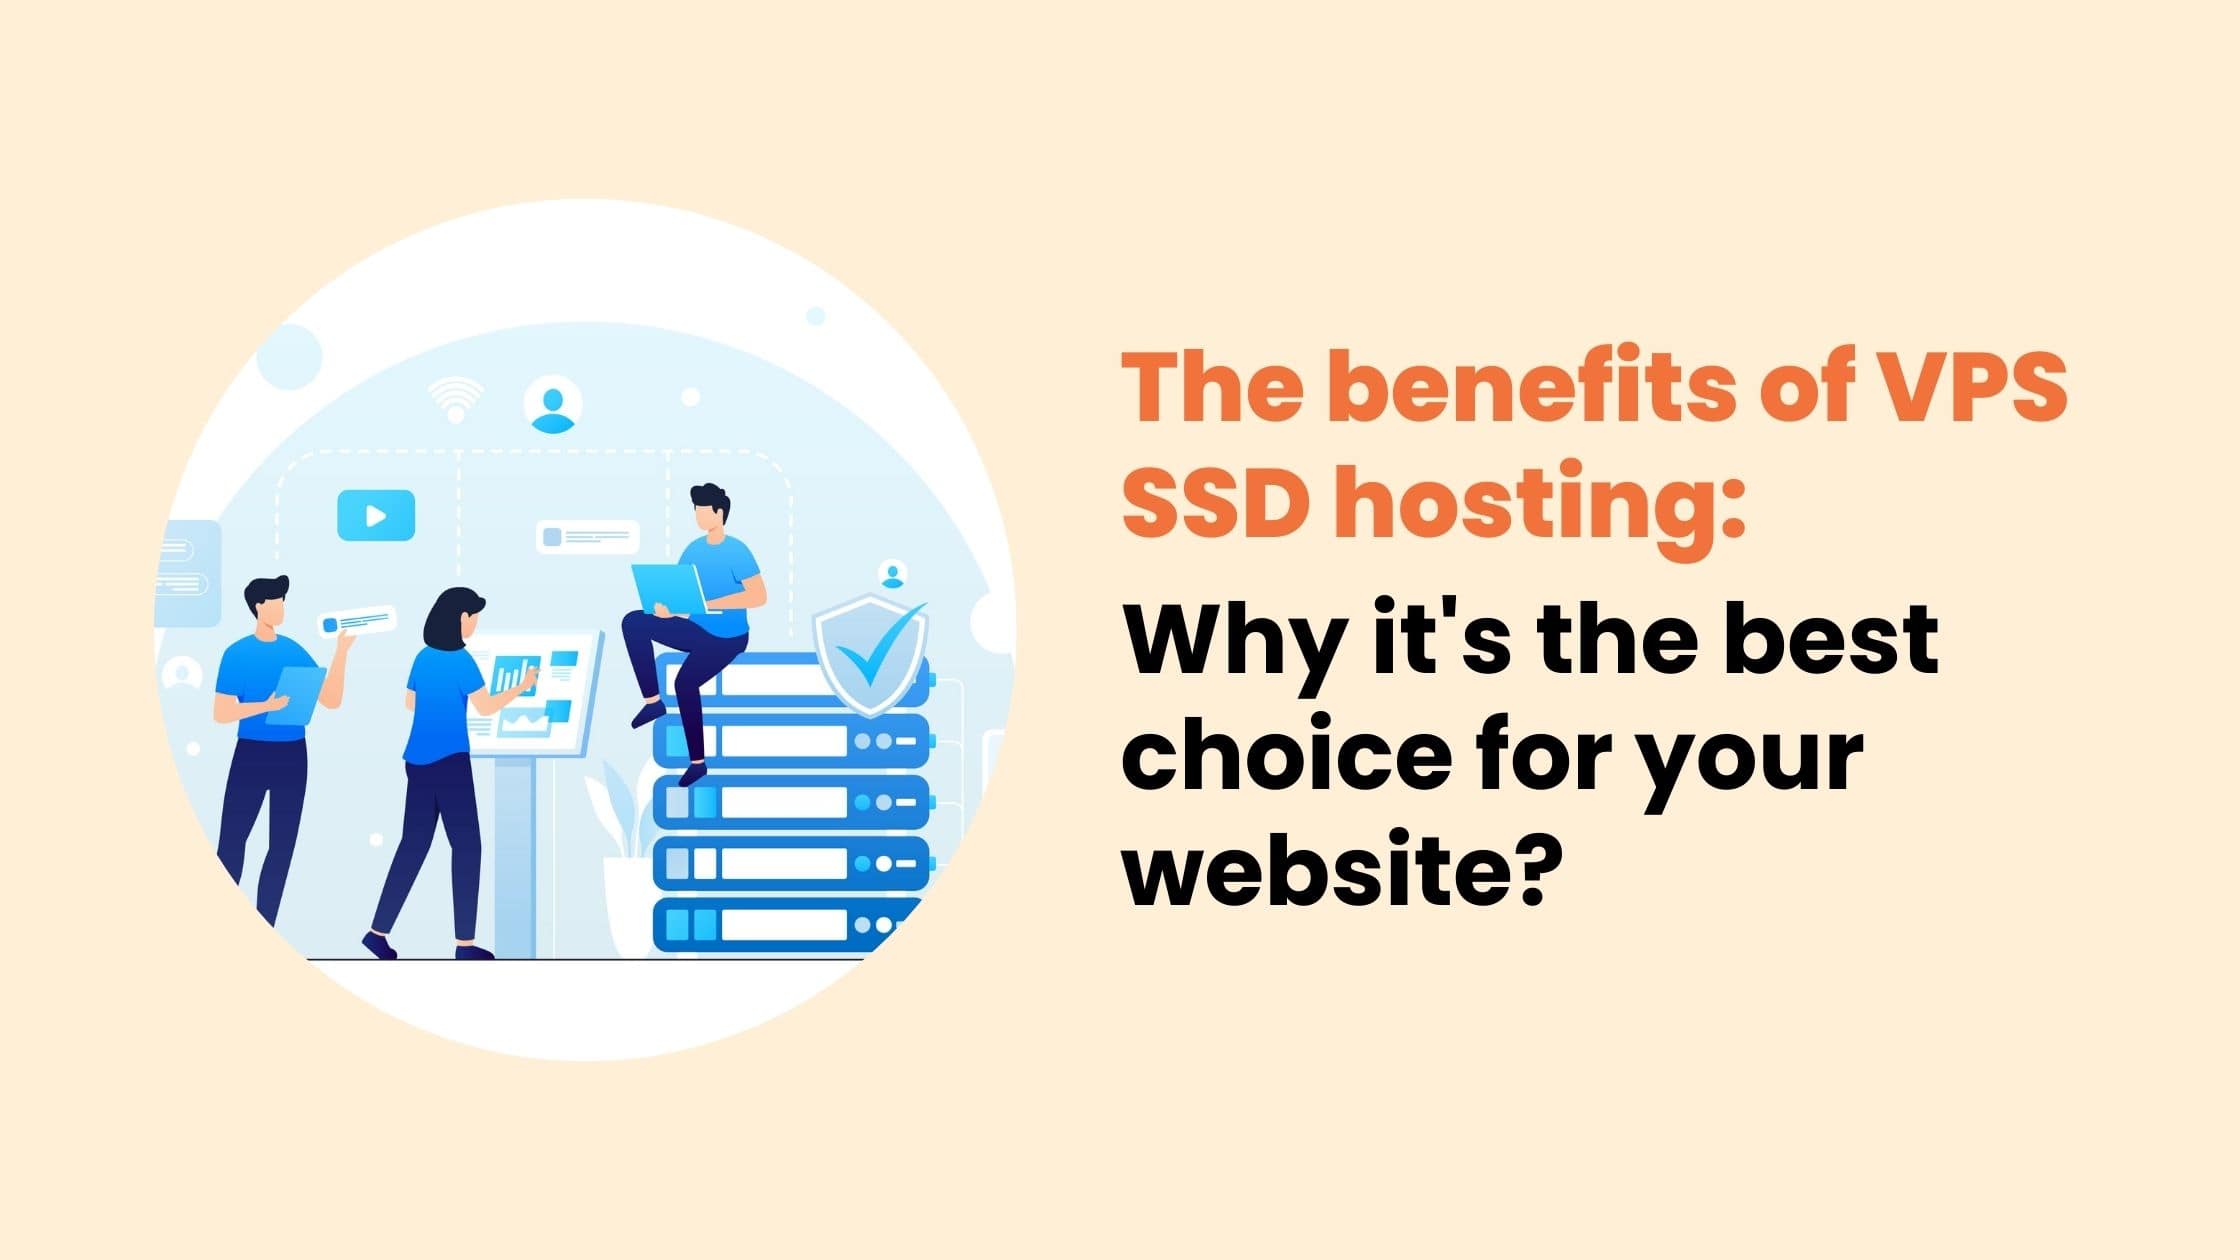 The benefits of VPS SSD hosting: Why it’s the best choice for your website?